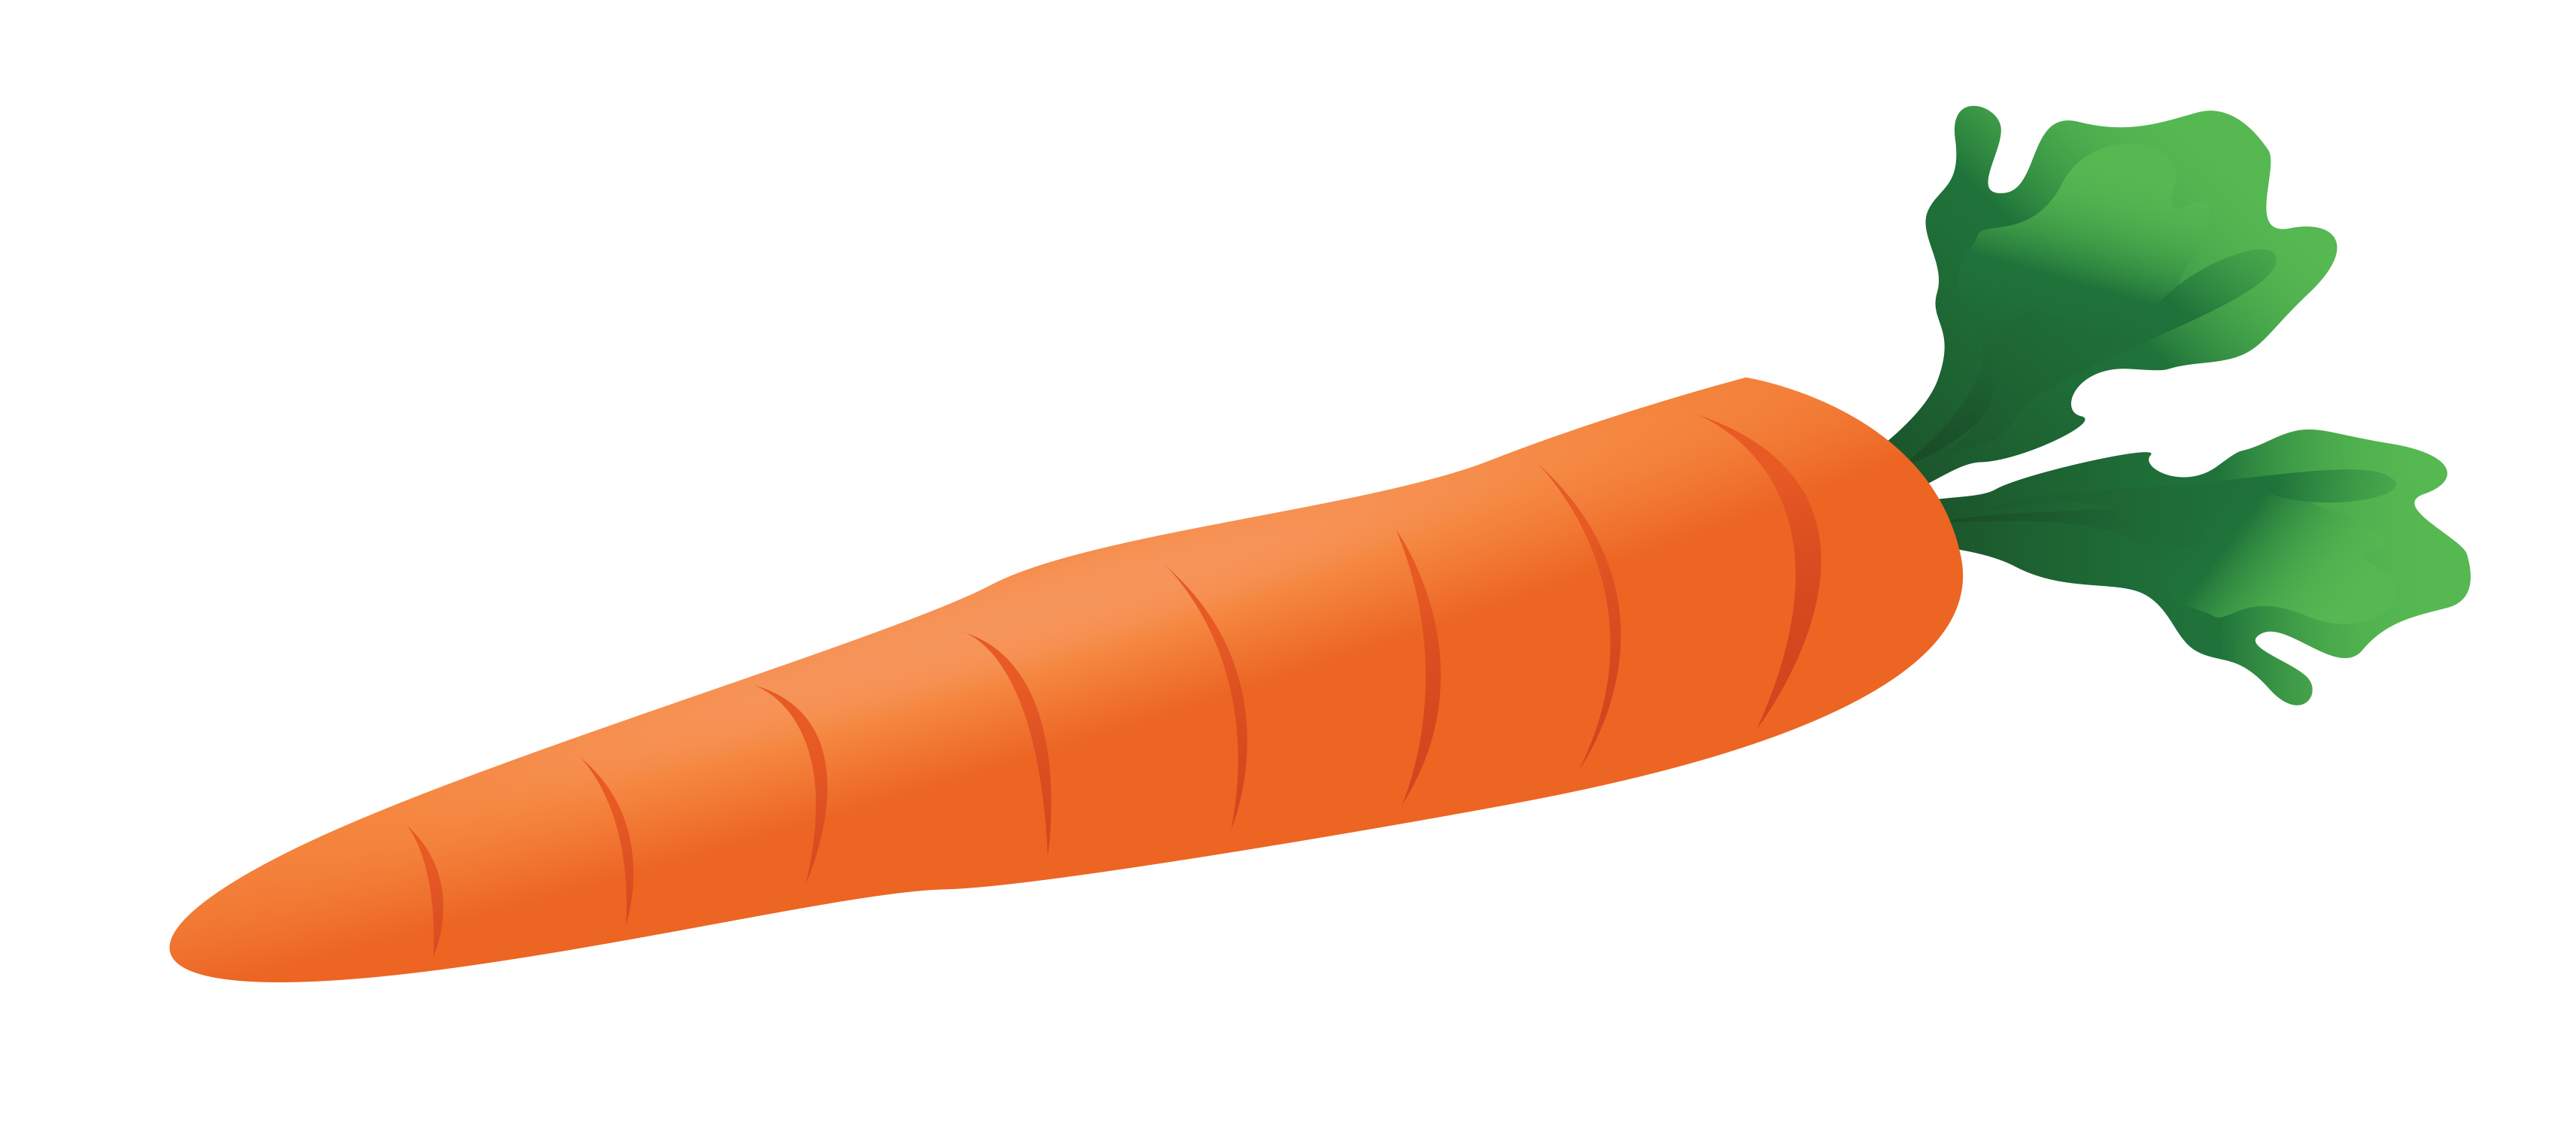 Carrot clip art free images clipart